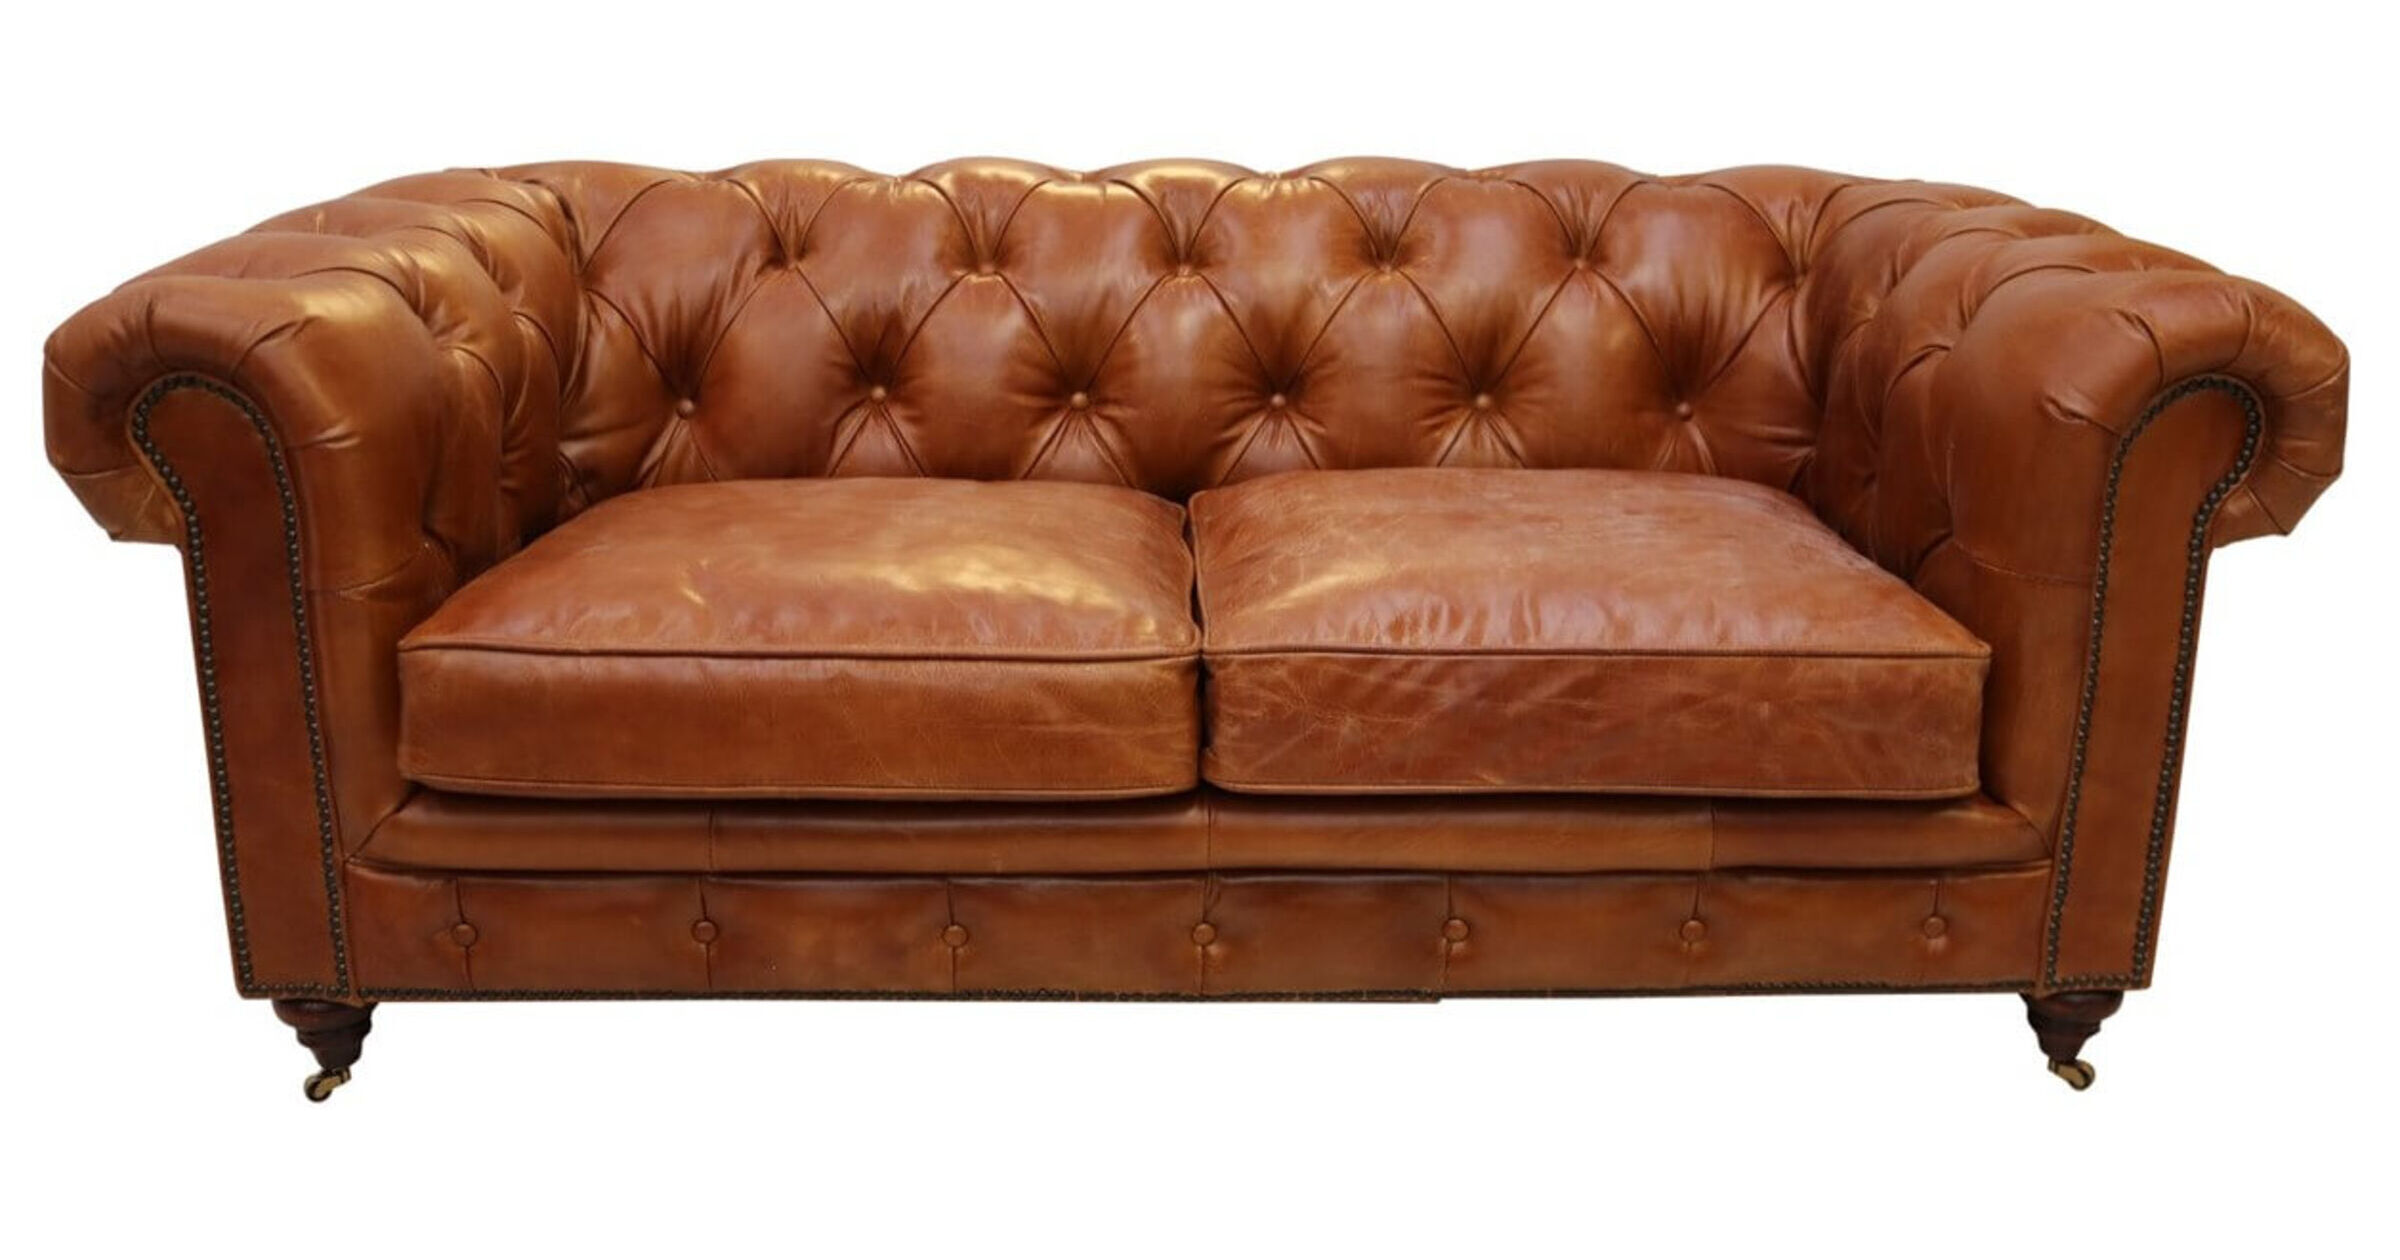 2 seater tan leather chesterfield sofa